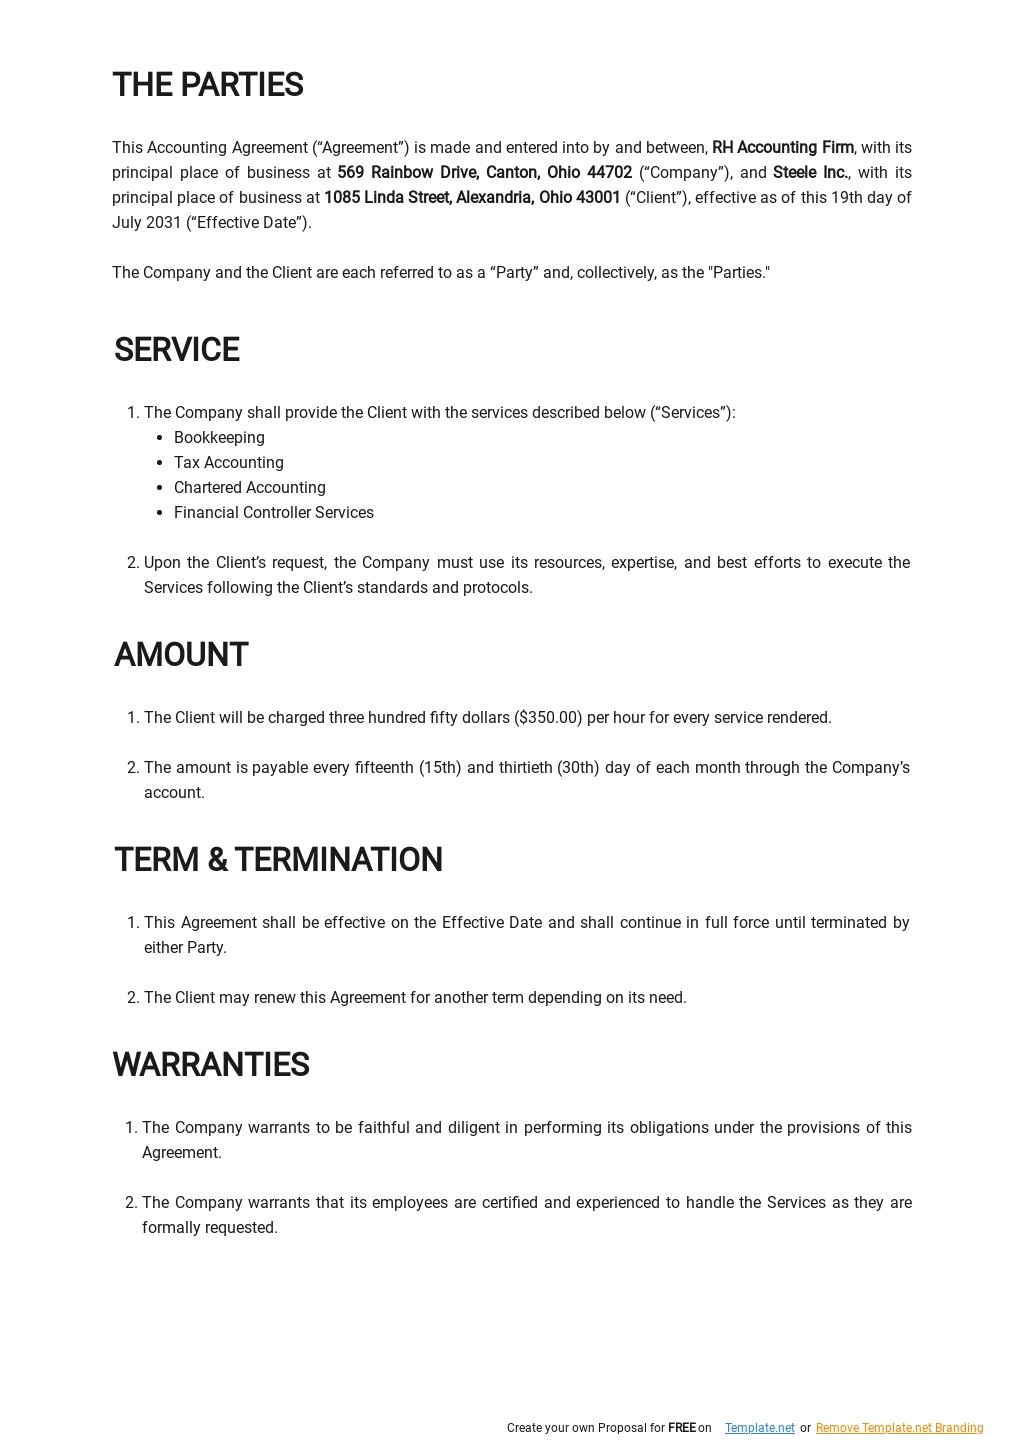 Accounting Services Agreement Template 1.jpe